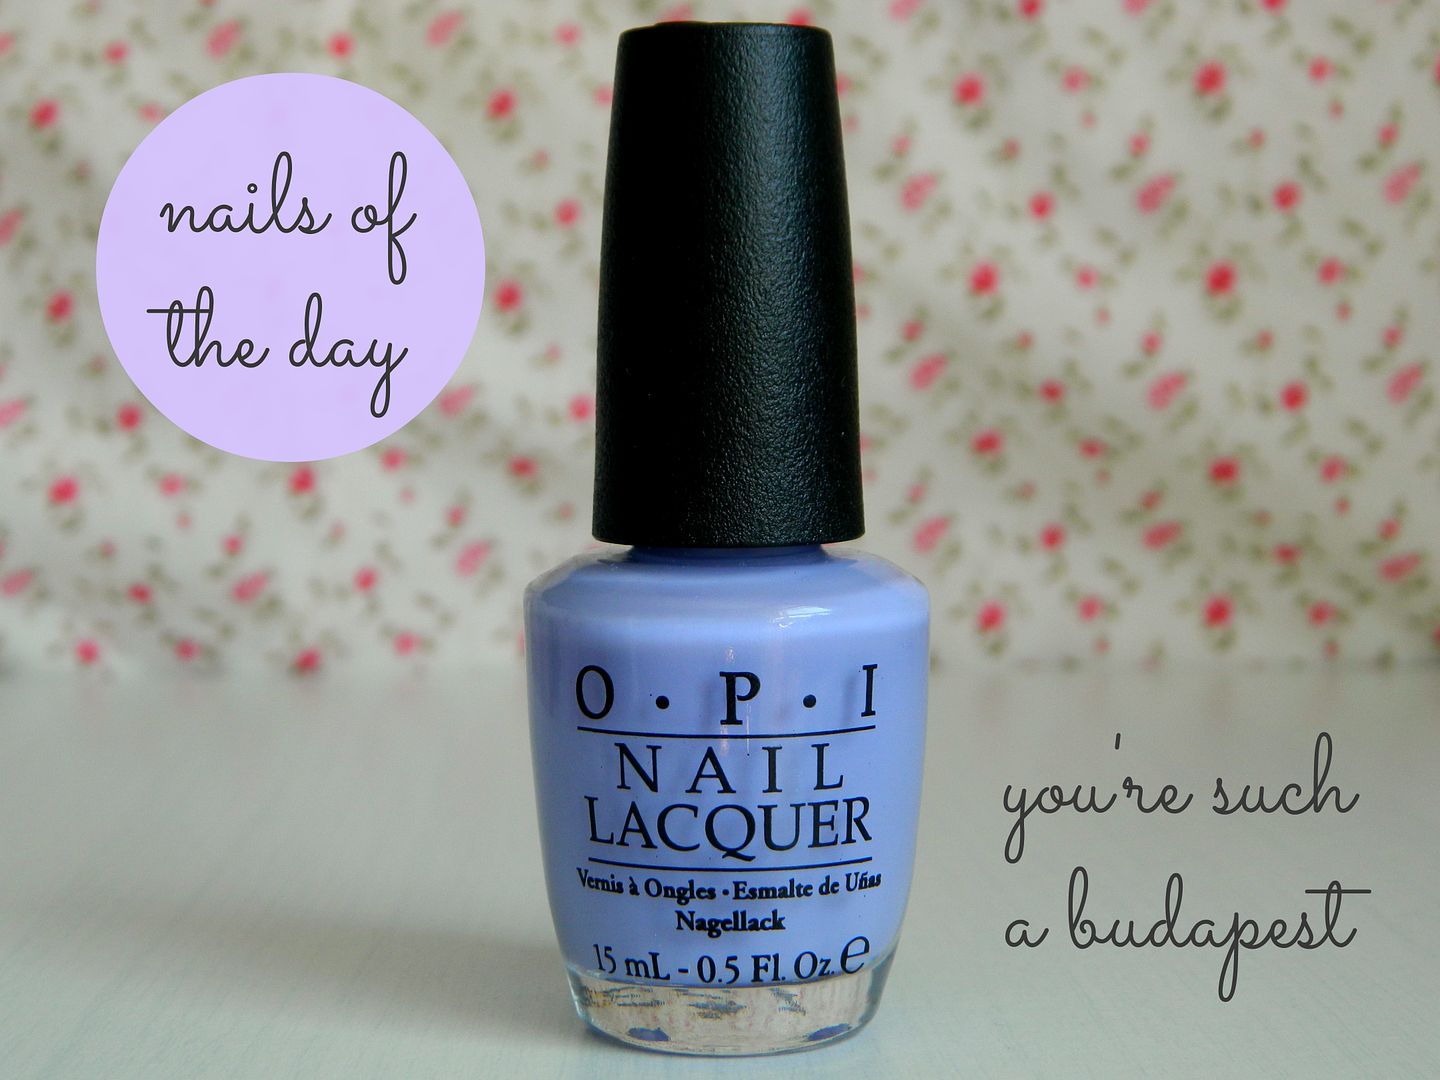 Nails Of The Day OPI Nail Lacquer You're Such A Budapest Belle-amie UK Beauty Fashion Lifestyle Blog